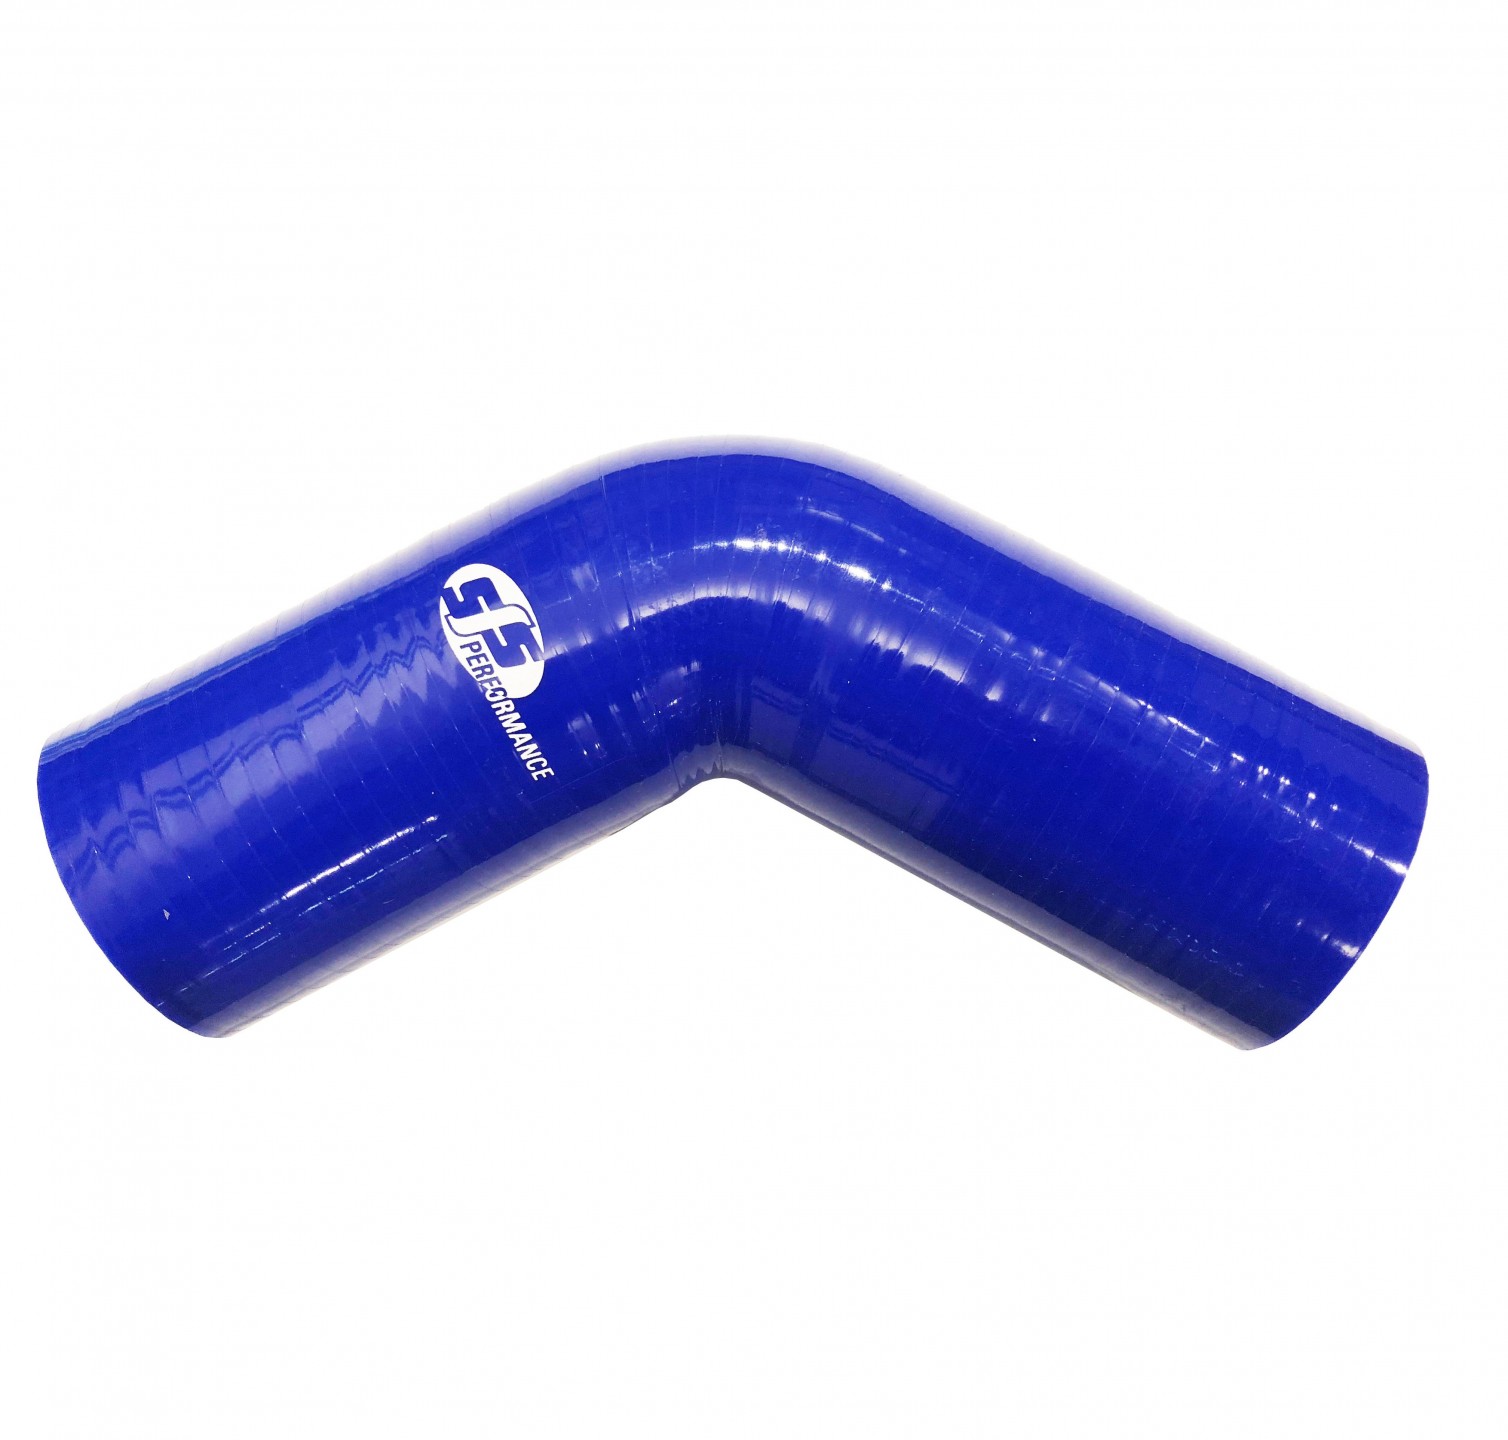 60° Silicon Elbow 102 mm bore, 152 mm legs, 3 ply Blue